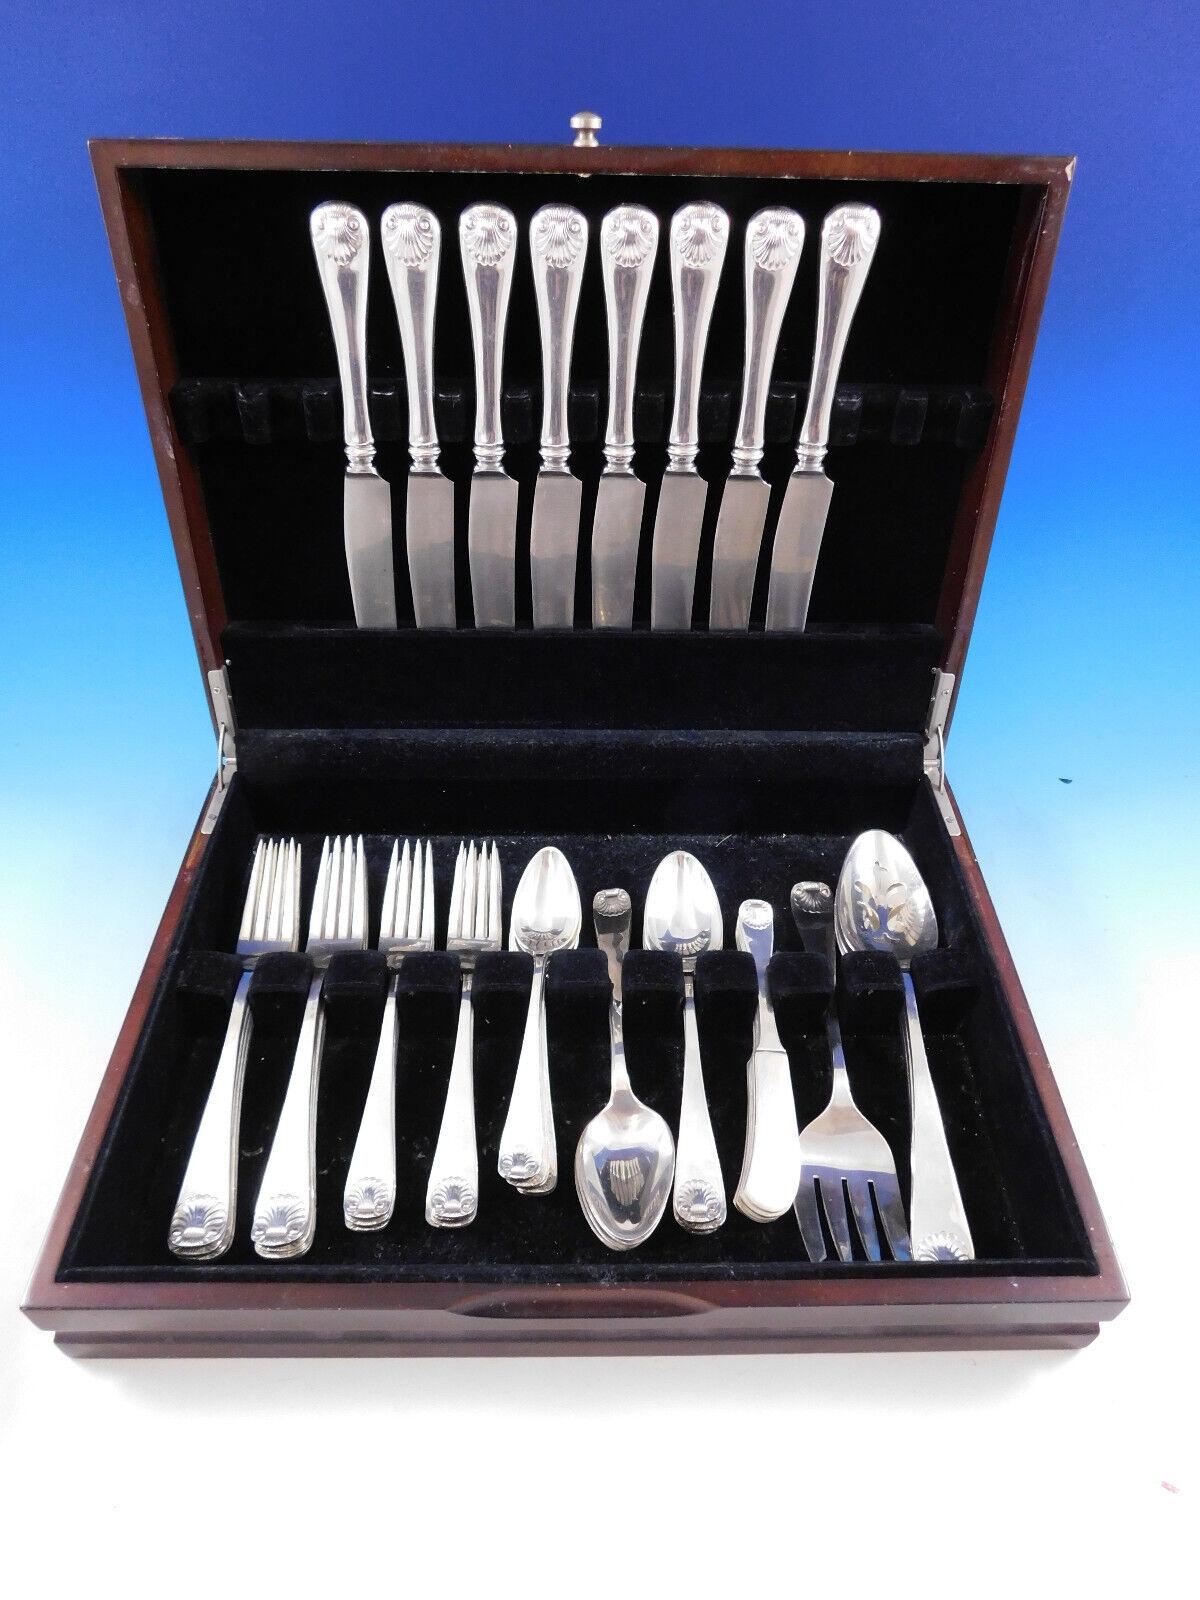 Old Newbury Crafters silver is genuinely handmade and wonderfully heavy, the machine cannot match the quality, durability, look and feel of handmade silver. The subtle hammered finish shows silver at its finest.

Hand wrought Dinner Size 